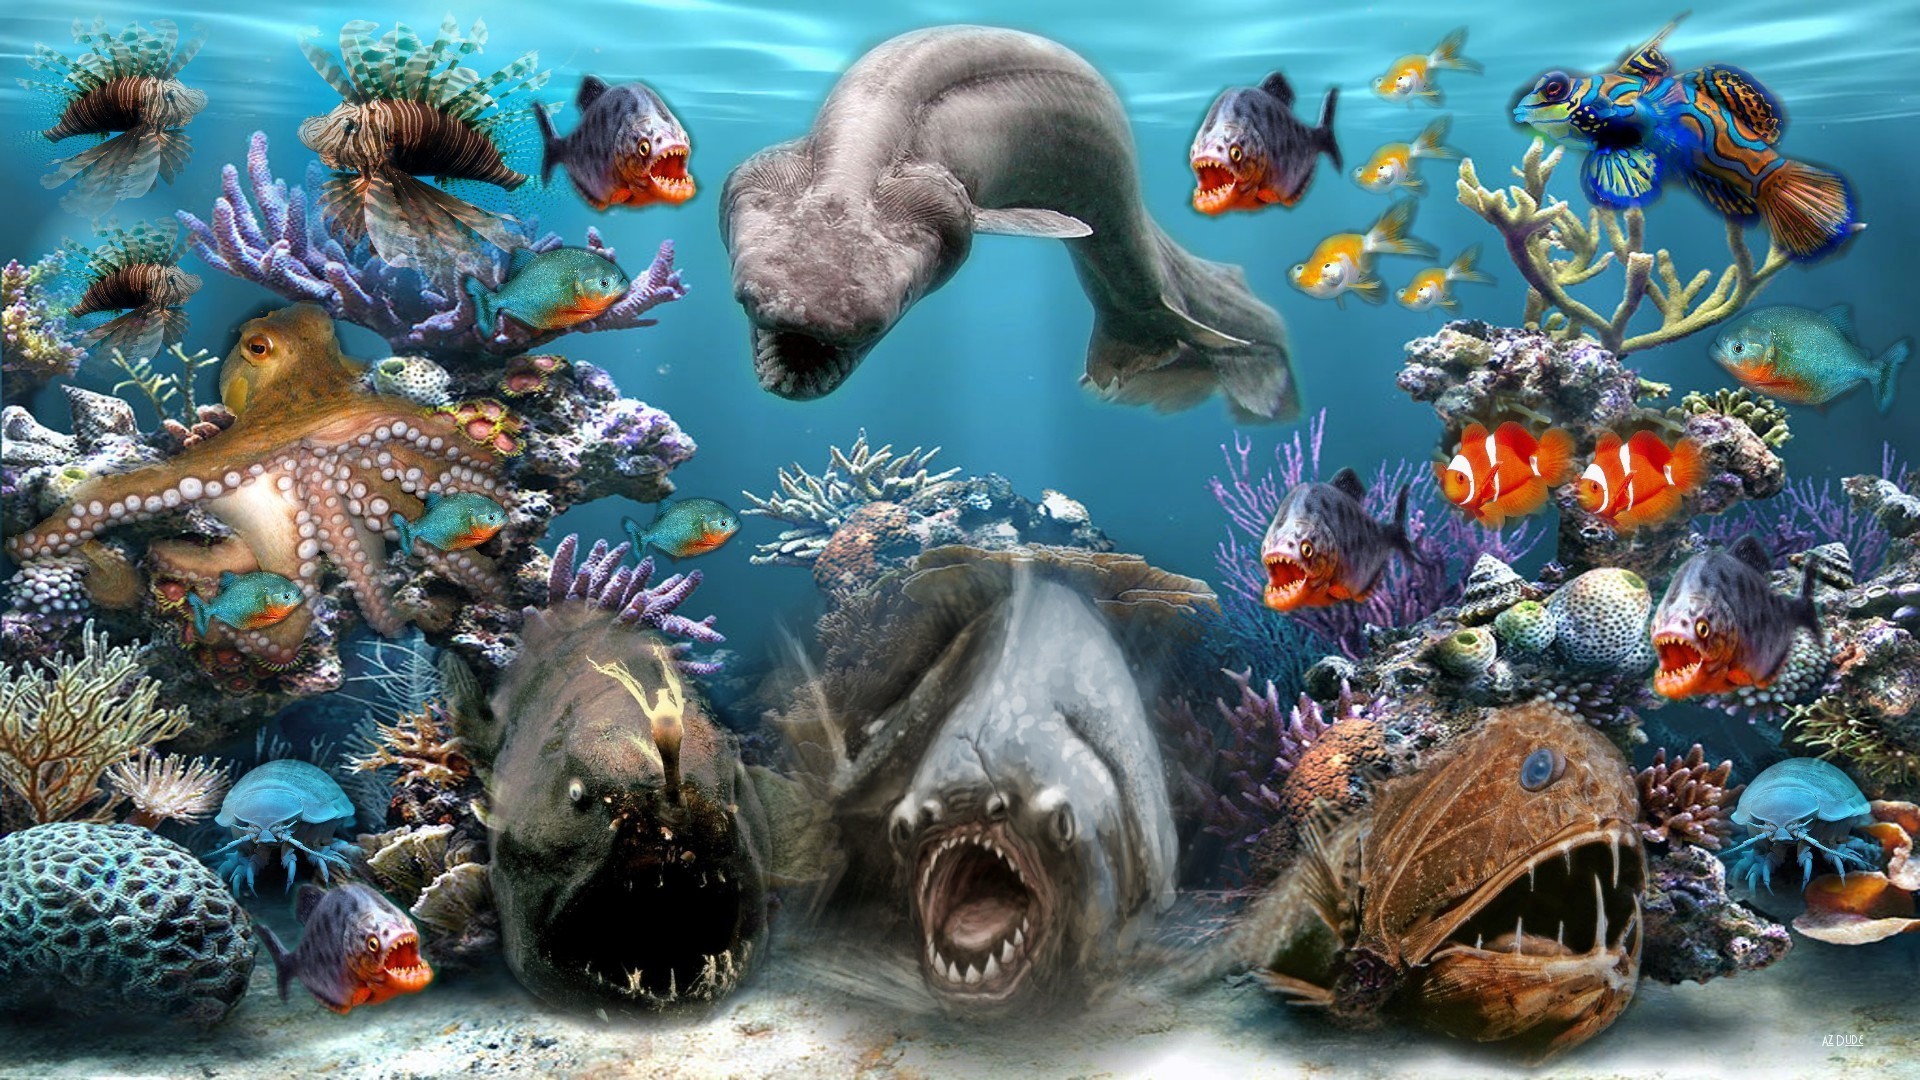 You can download Sea Creature Hd Wallpapers here. Sea Creature Hd Wallpapers In High Resolution